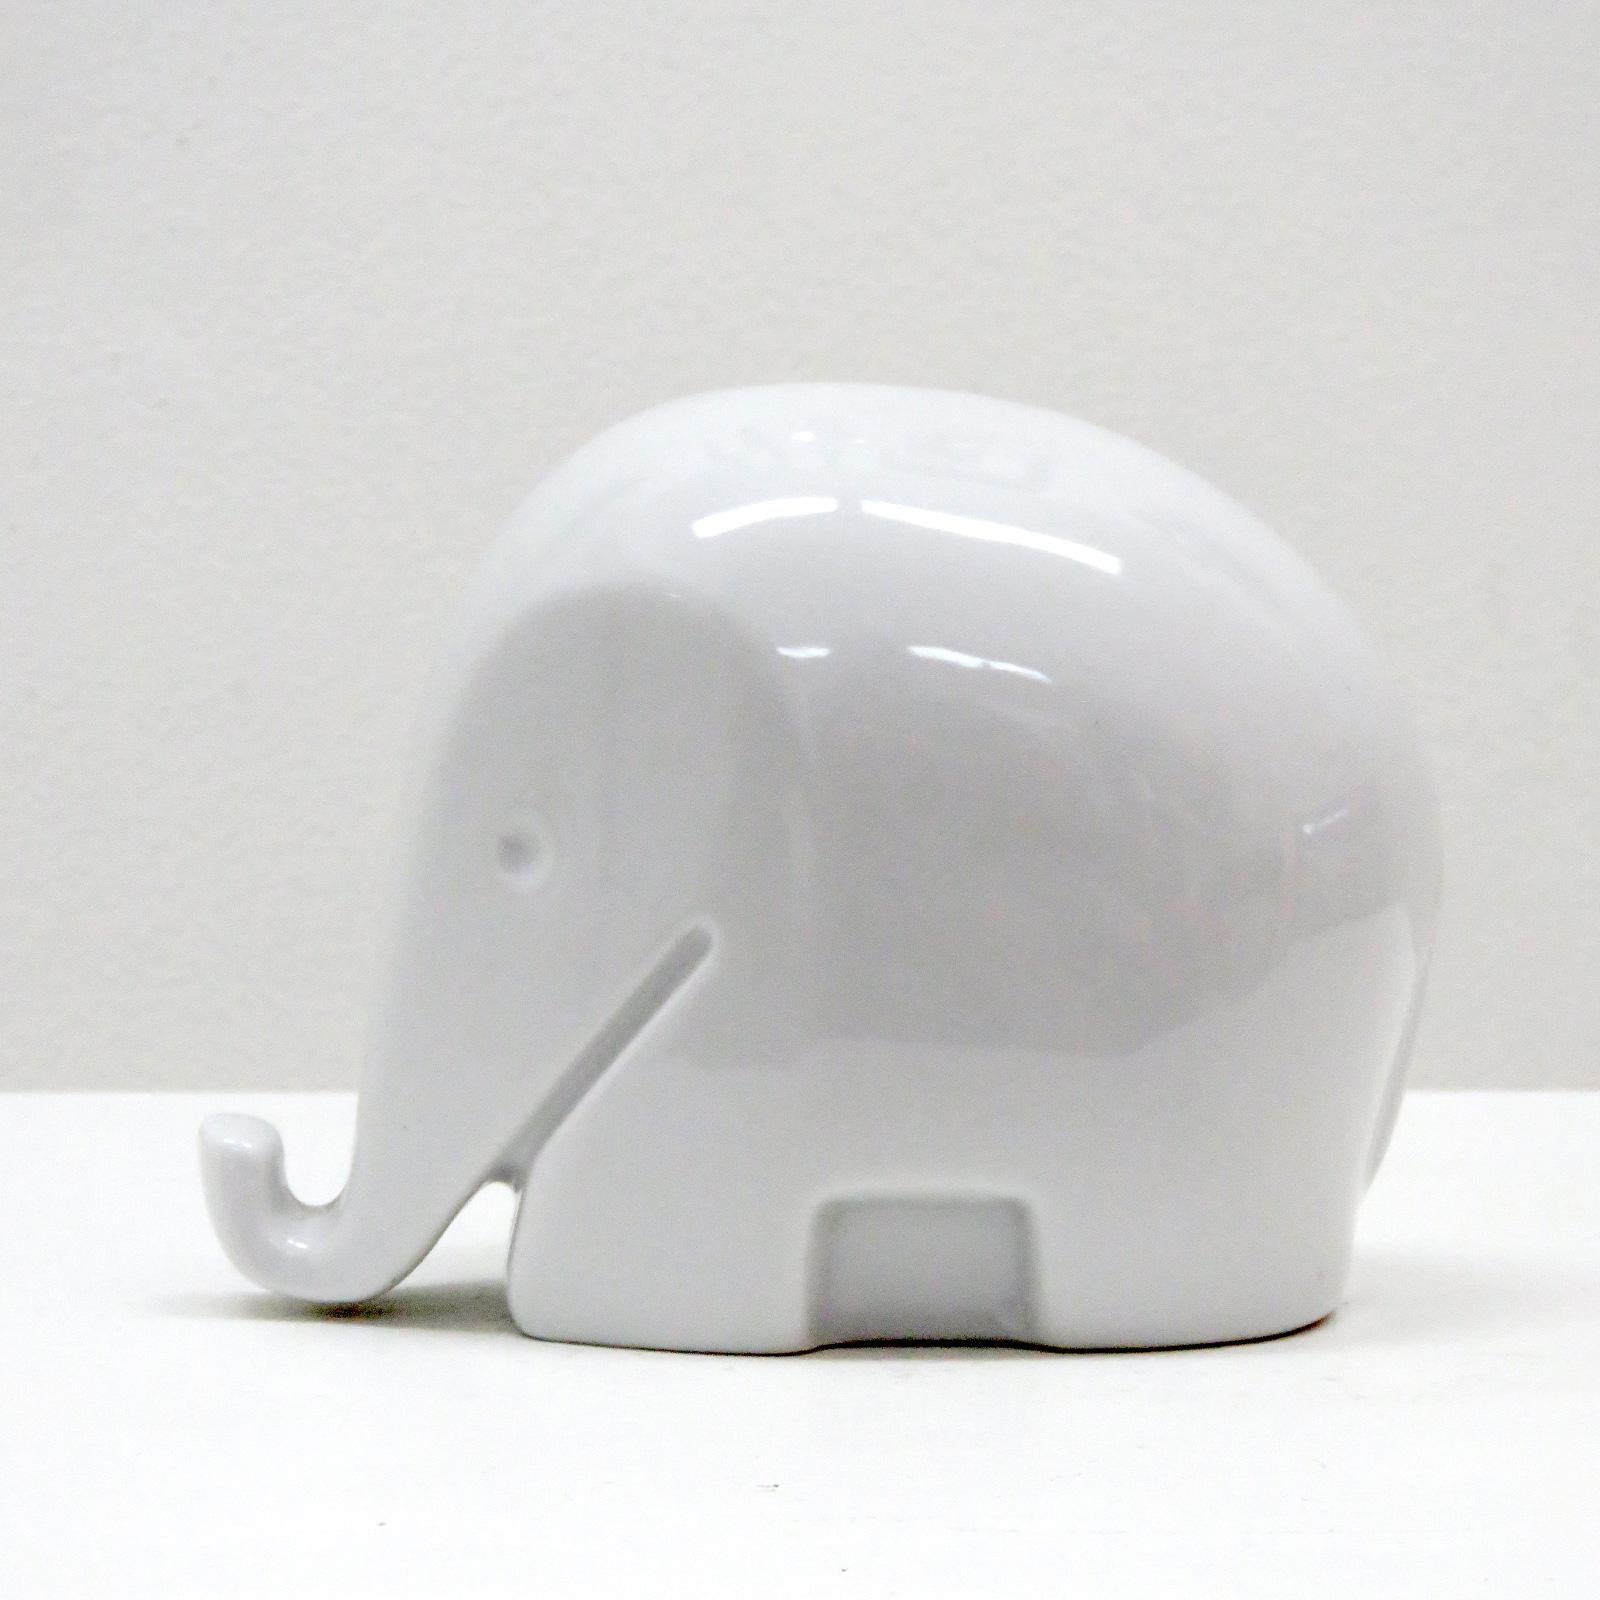 Precious iconic elephant shaped piggy bank in white porcelain by Luigi Colani for Höchst Porcelain, Germany, 1970, marked